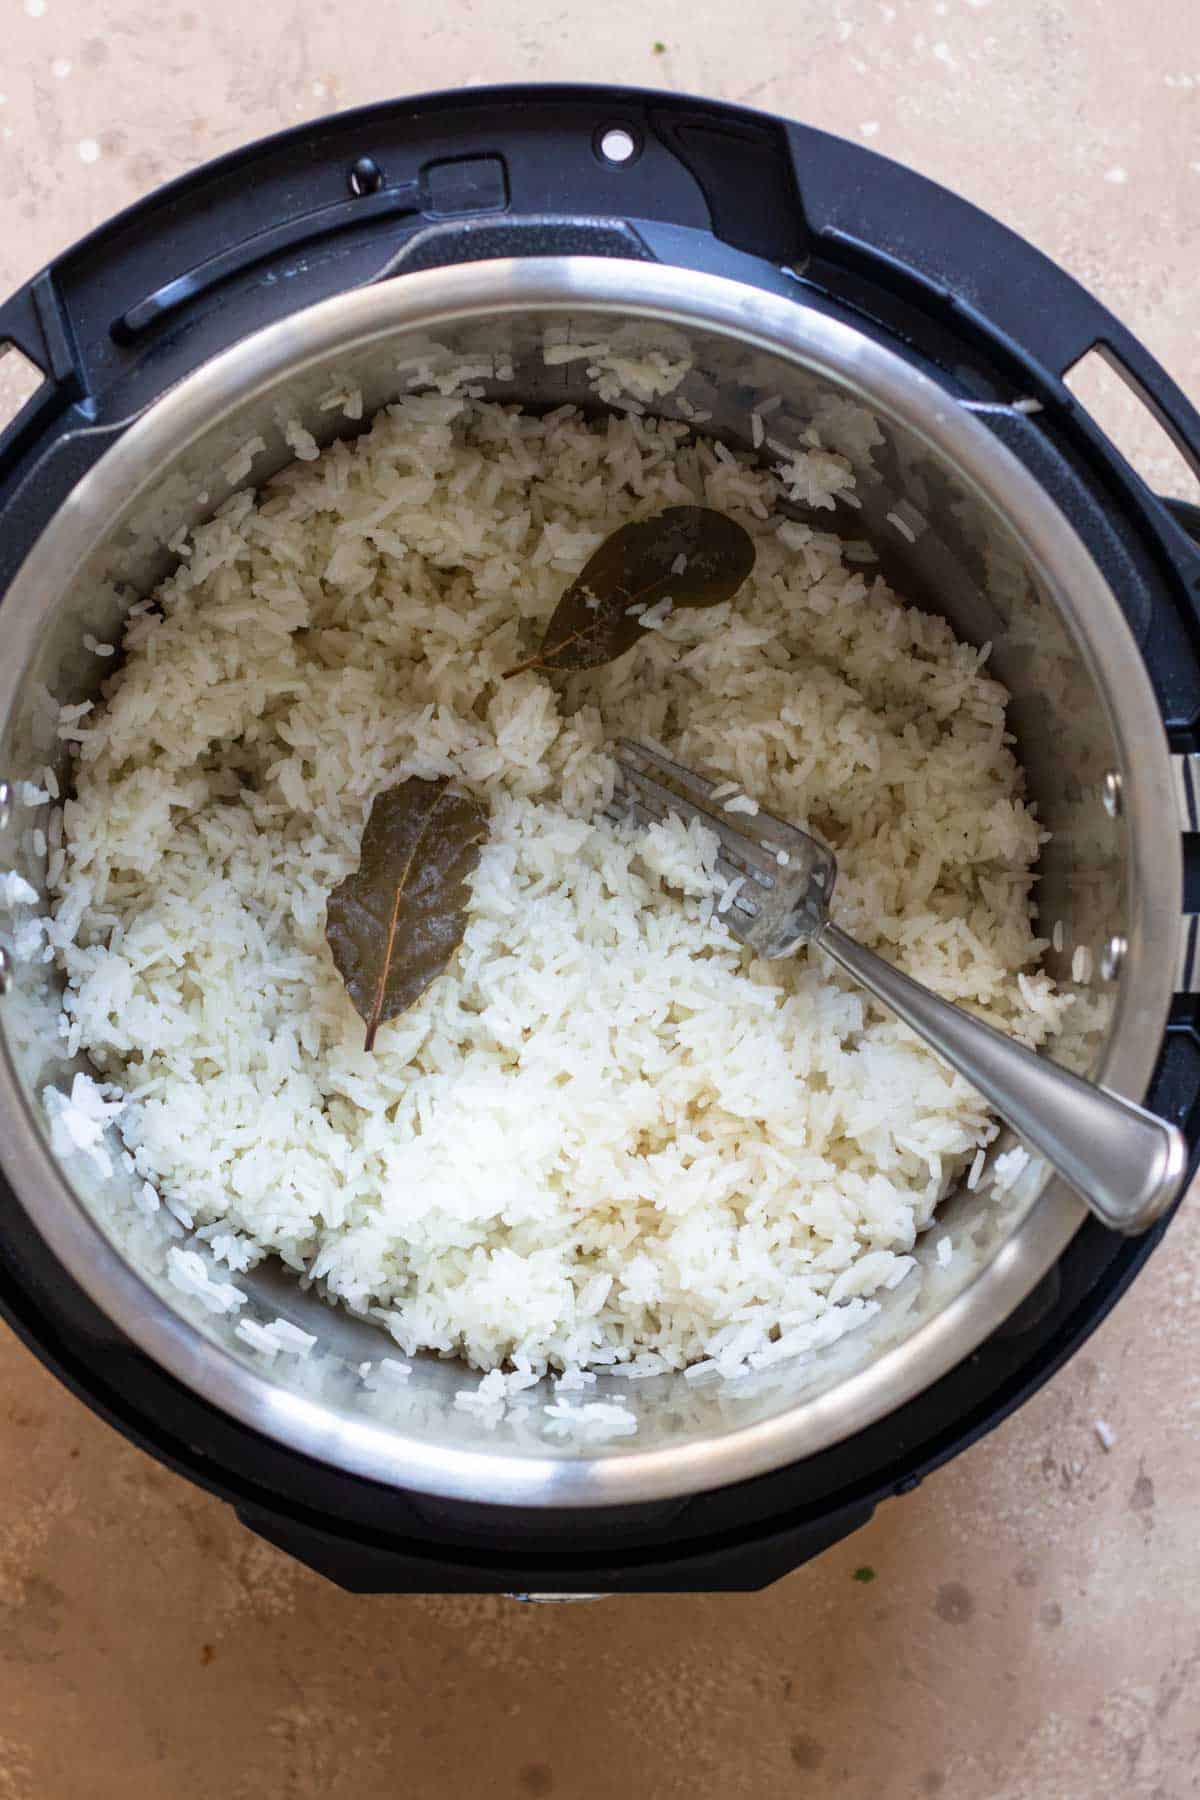 Cooked rice after fluffing it with a fork.